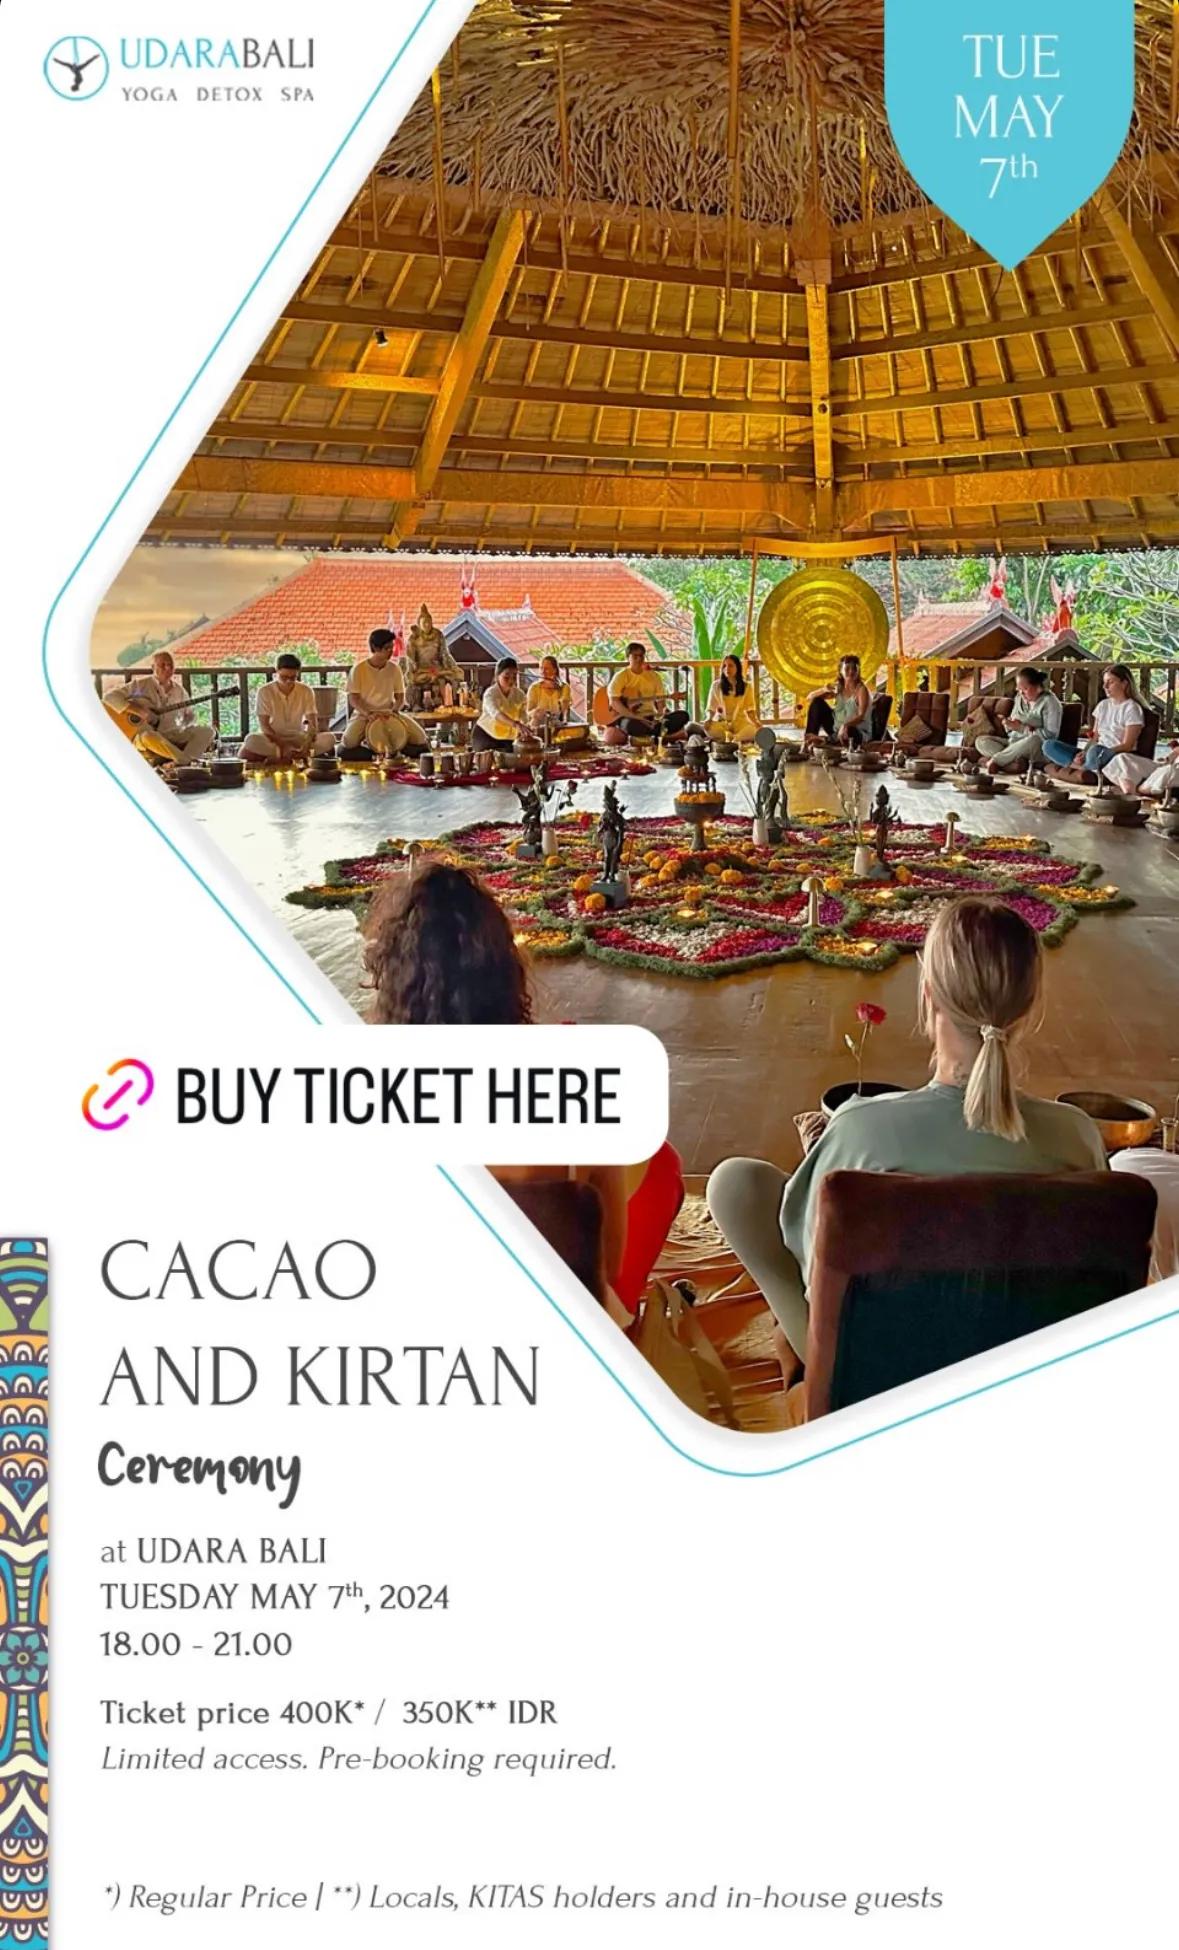 Event at Udara on May 7 2024: Cacao And Kirtan Ceremony